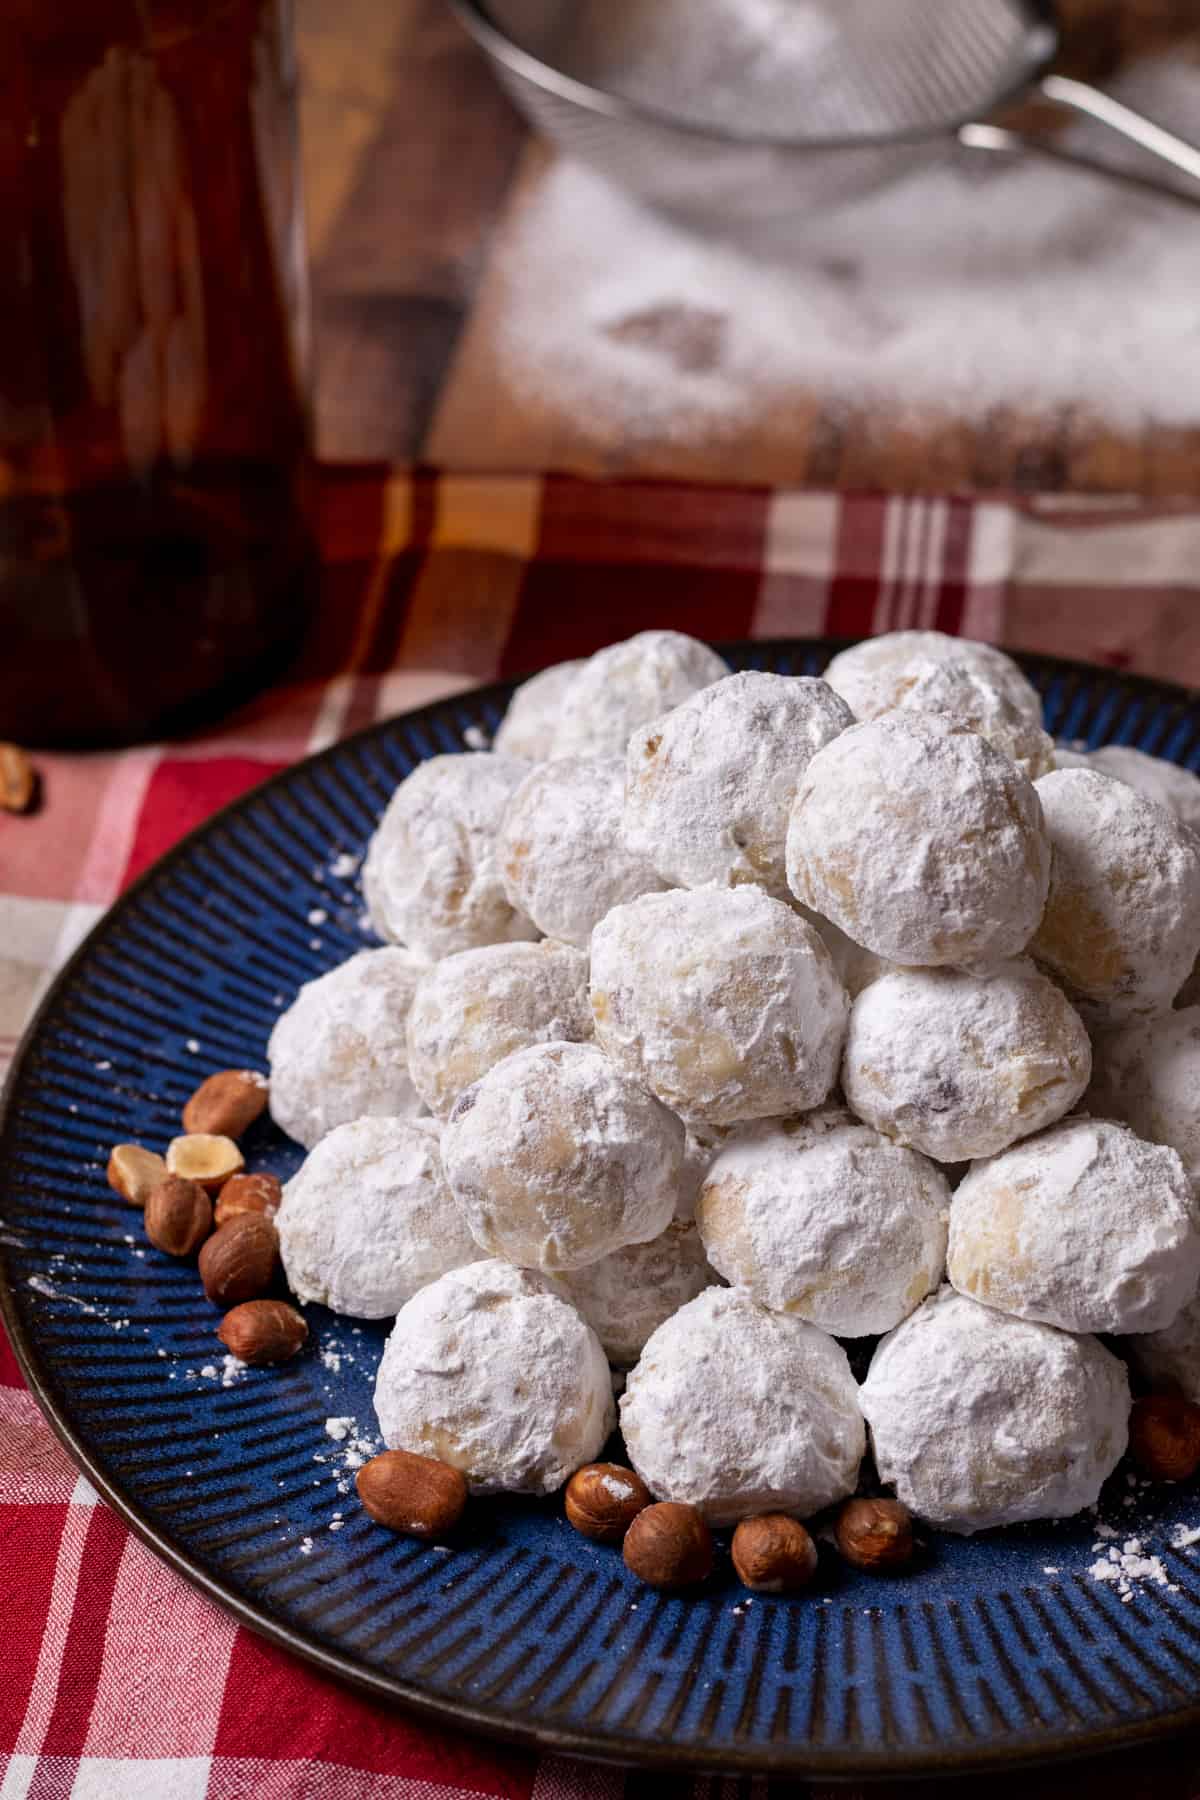 butterball cookies on a blue plate with hazelnuts.